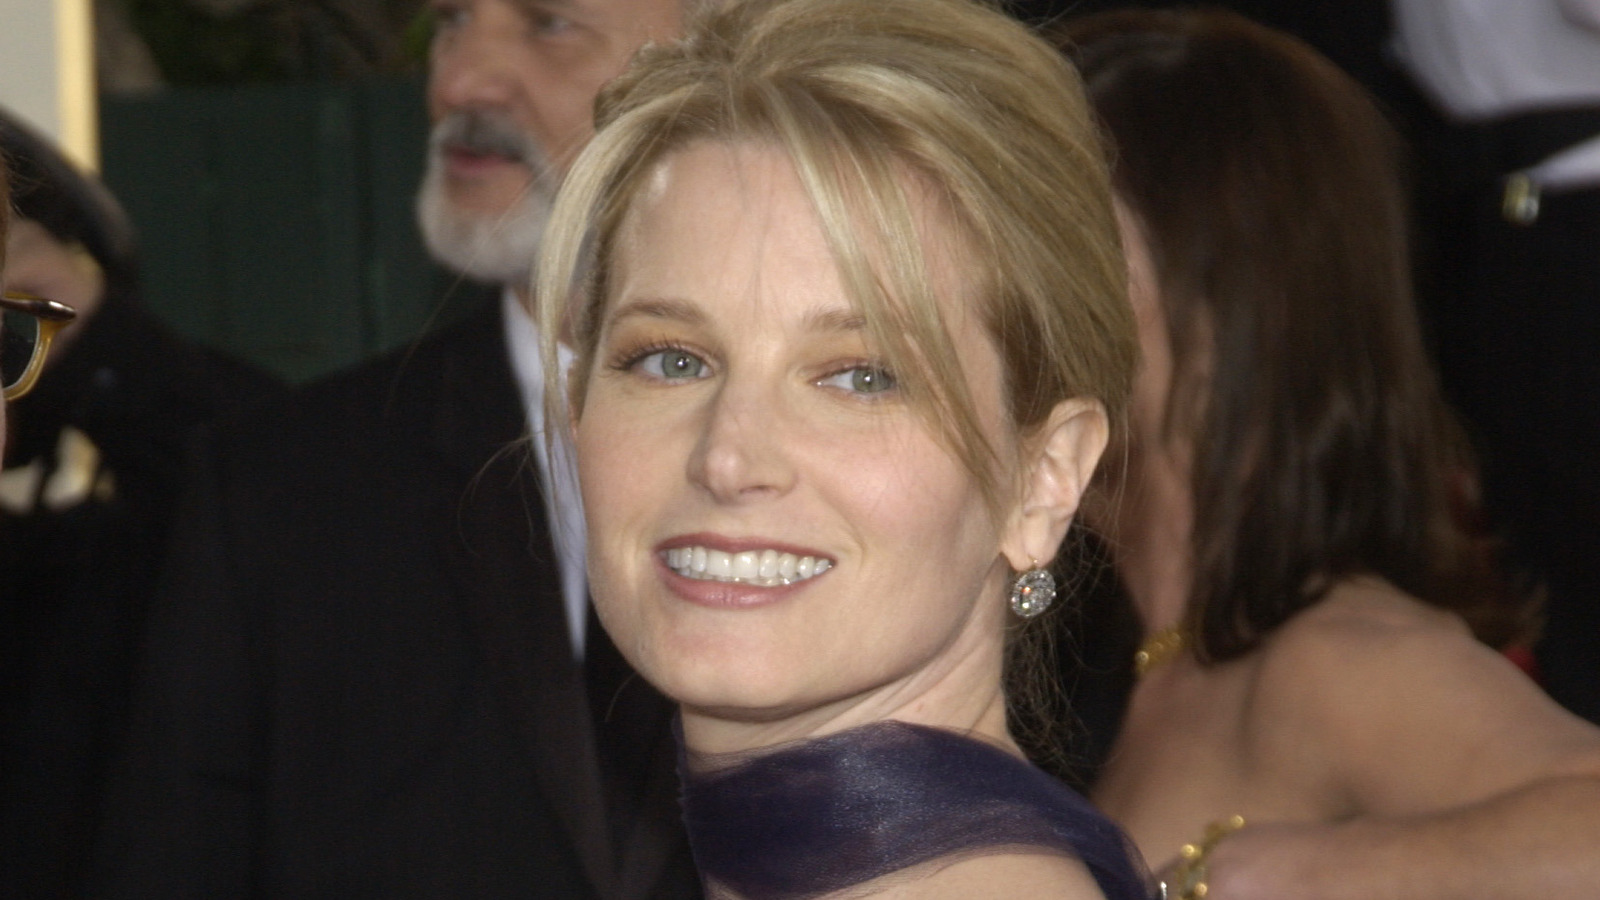 Jackie Brown star Bridget Fonda says she's DONE with Hollywood